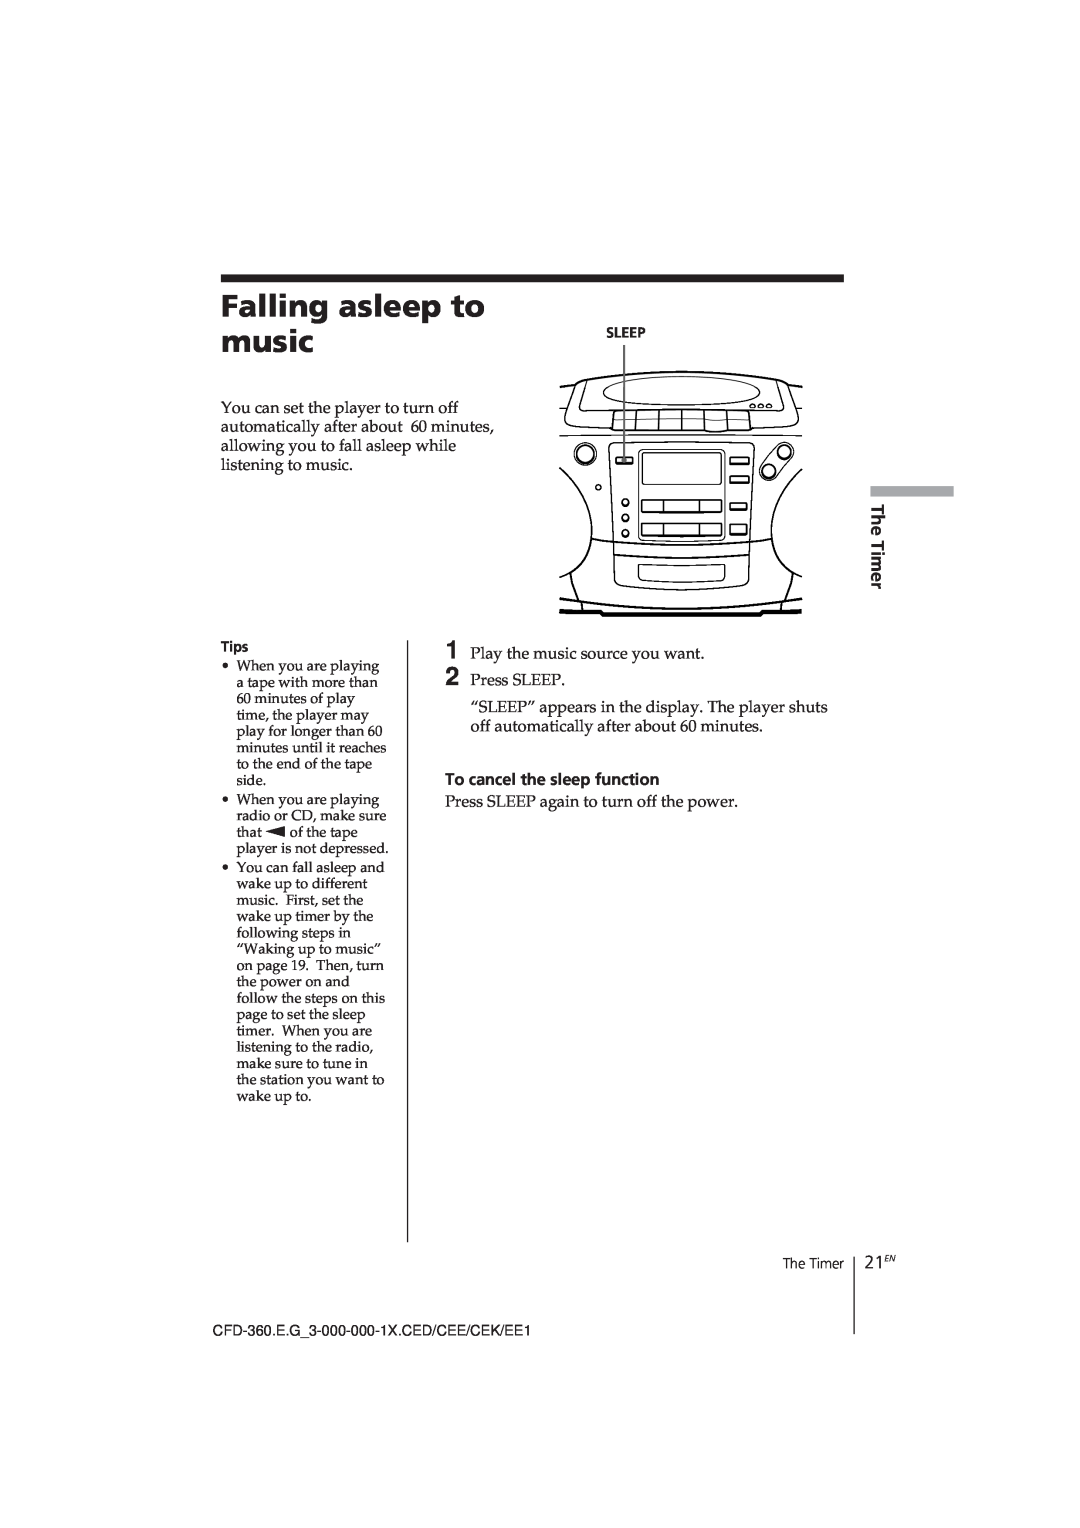 Sony CFD-360 operating instructions Falling asleep to music, 21EN 